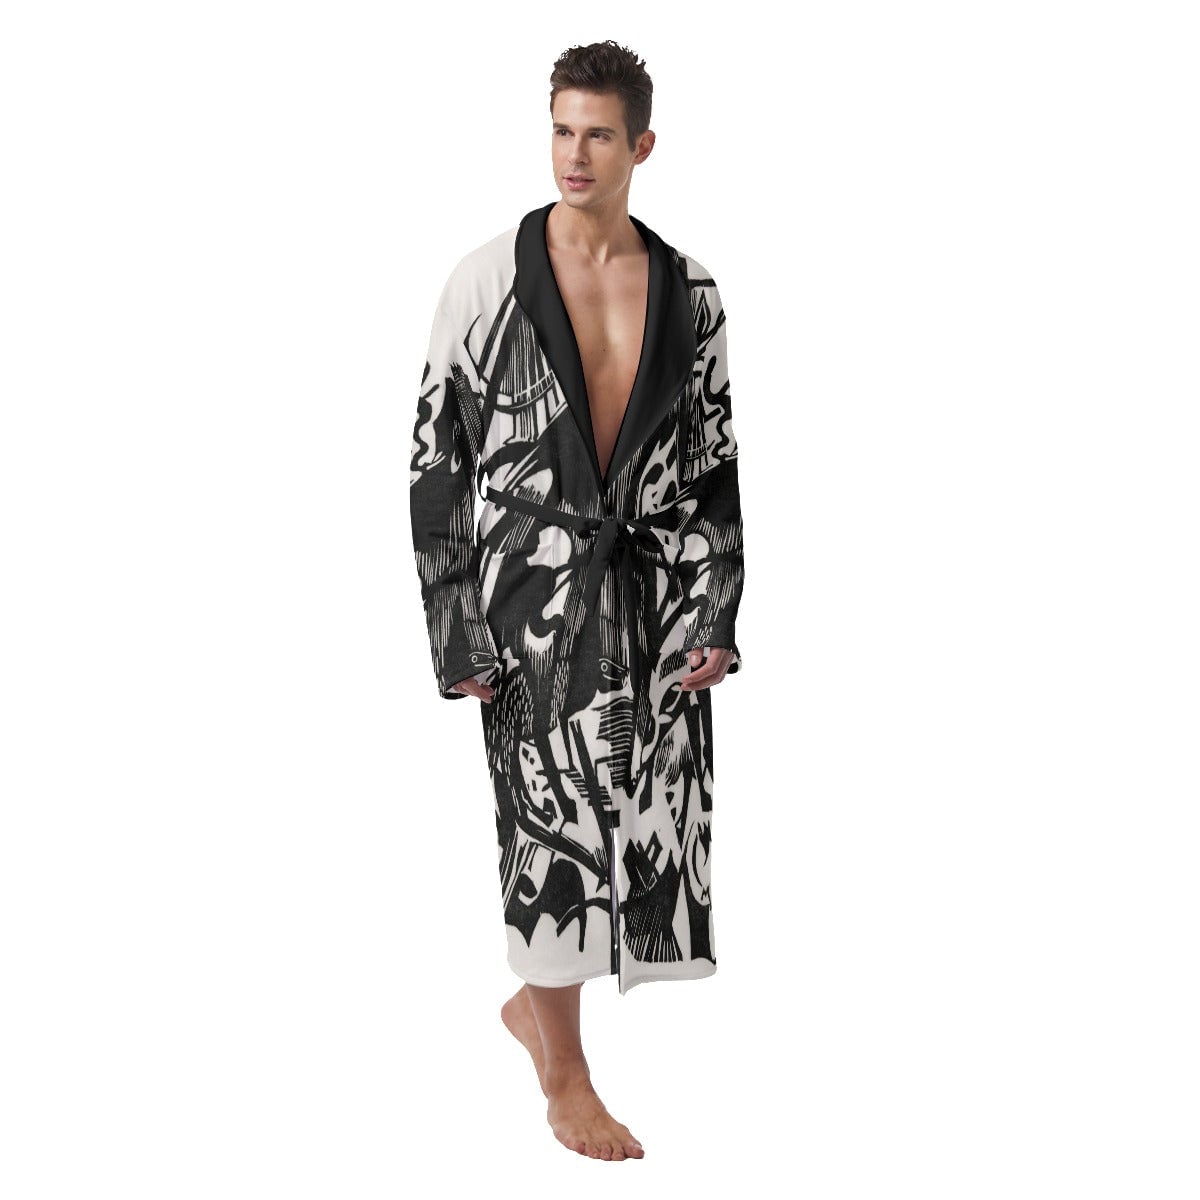 Birth of the Wolves by Franz Marc Art Heavy Fleece Robe